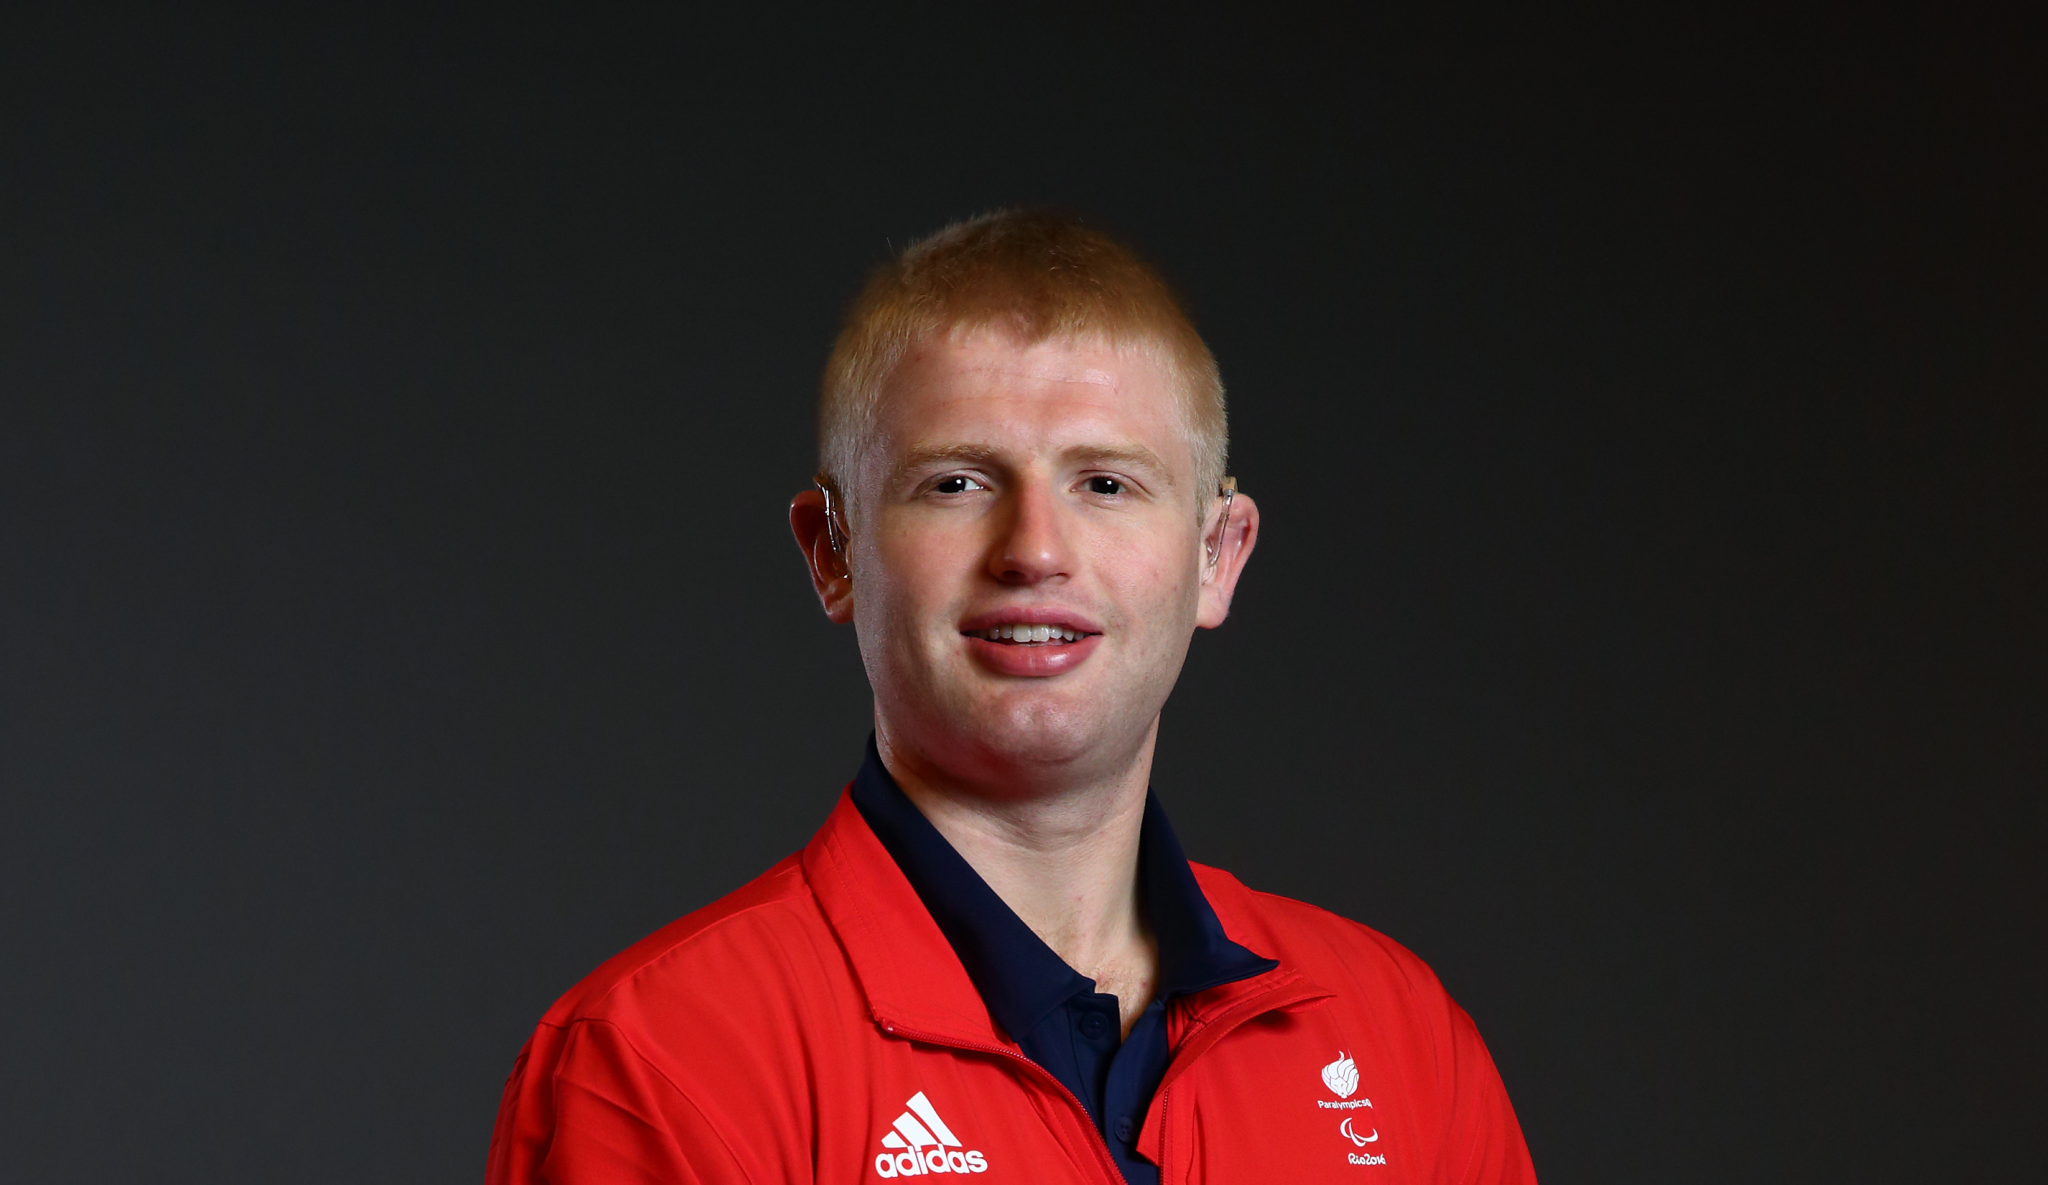 Judoka Skelley looks for sponsors in hopes to defend Paralympic title at Paris 2024